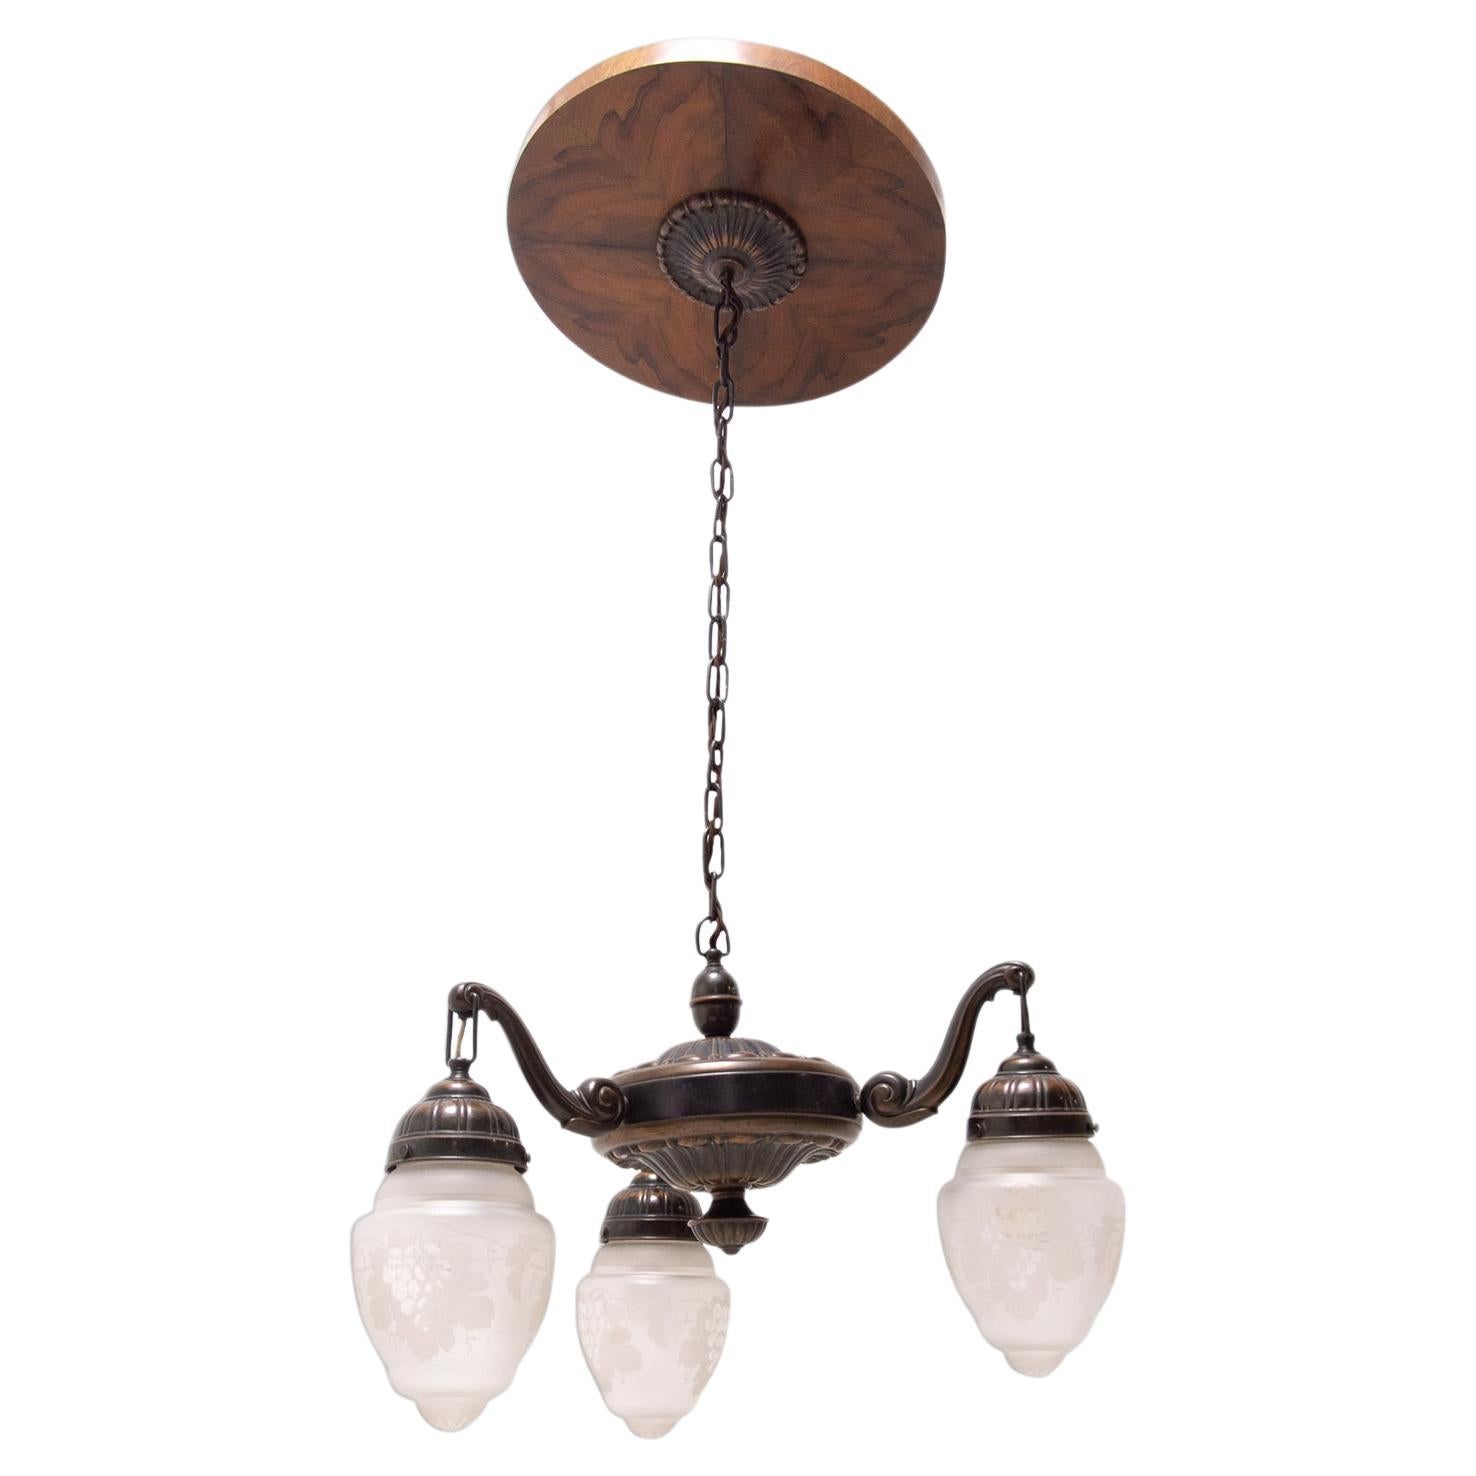 Historicizing Brass Three-Armed Chandelier, Turn of the 19th and 20th Century